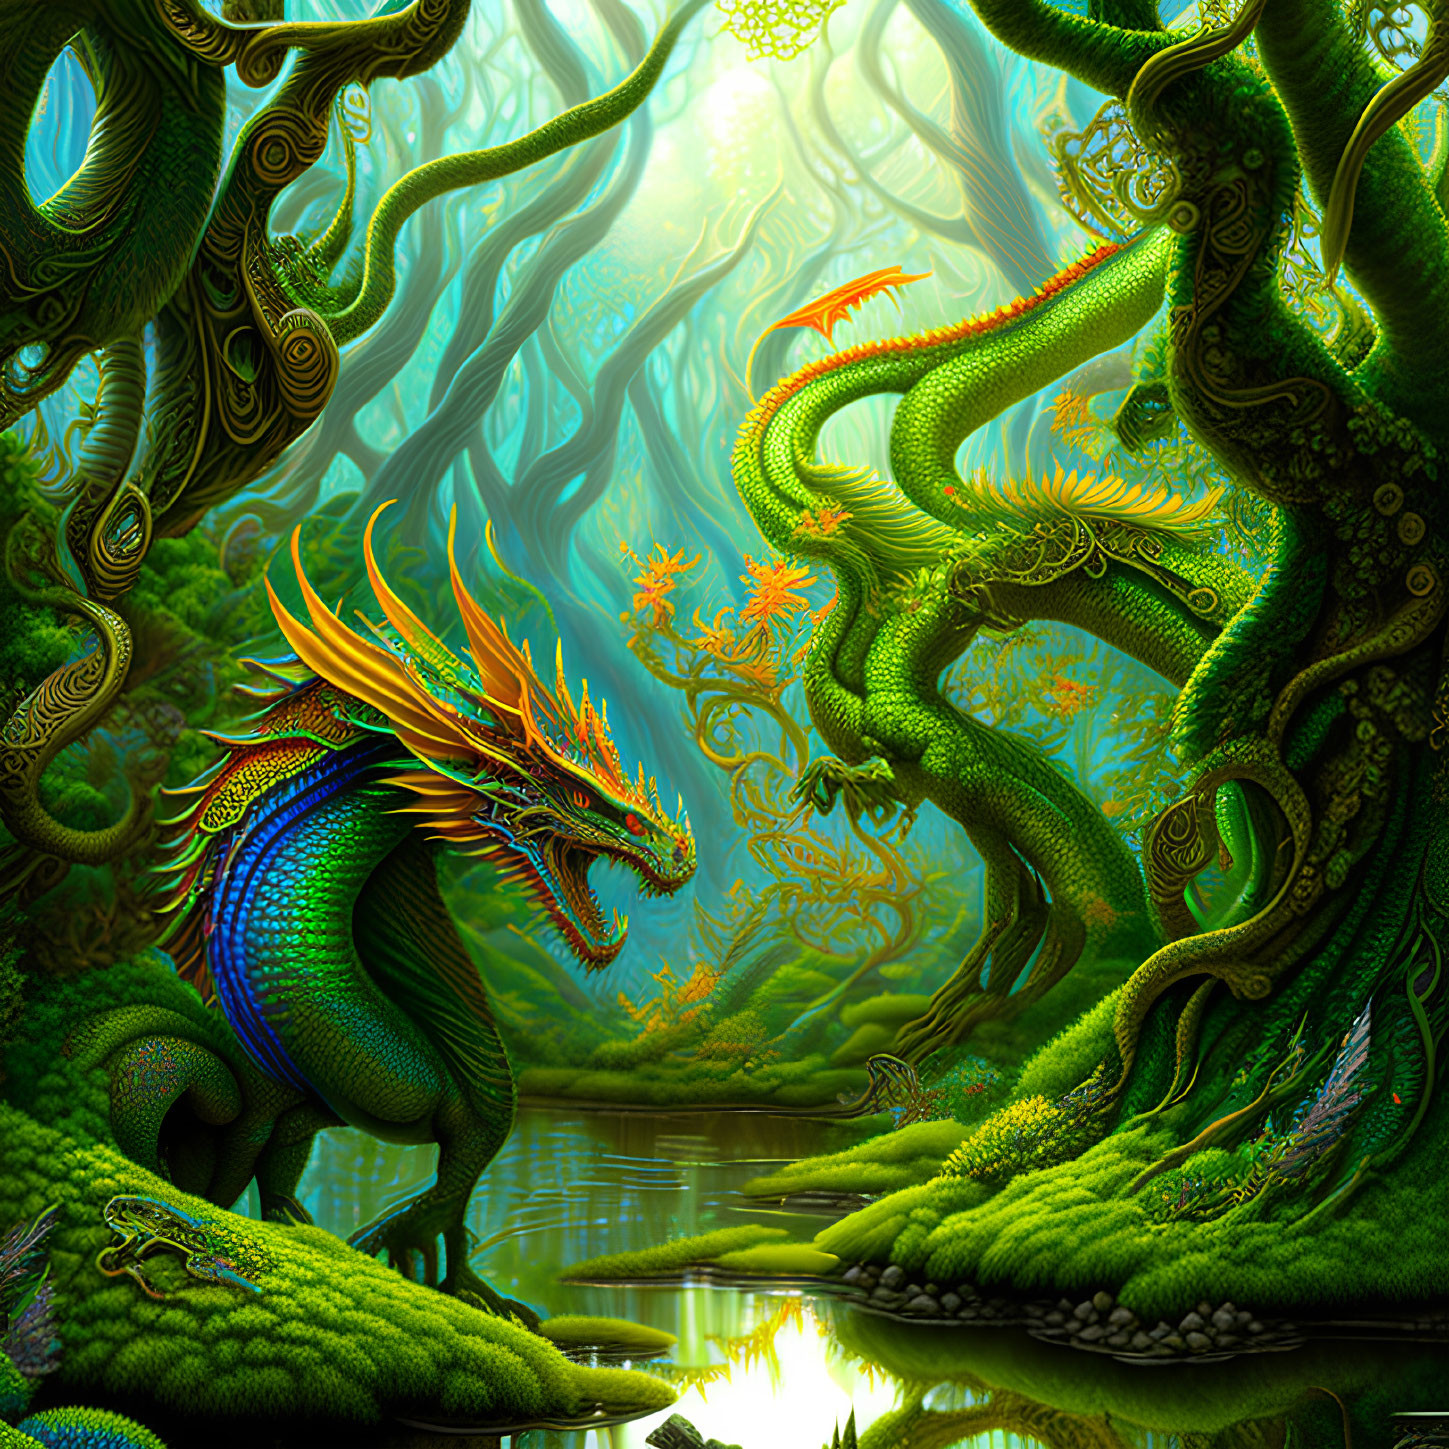 Colorful Dragon in Enchanted Forest Scene Illustration